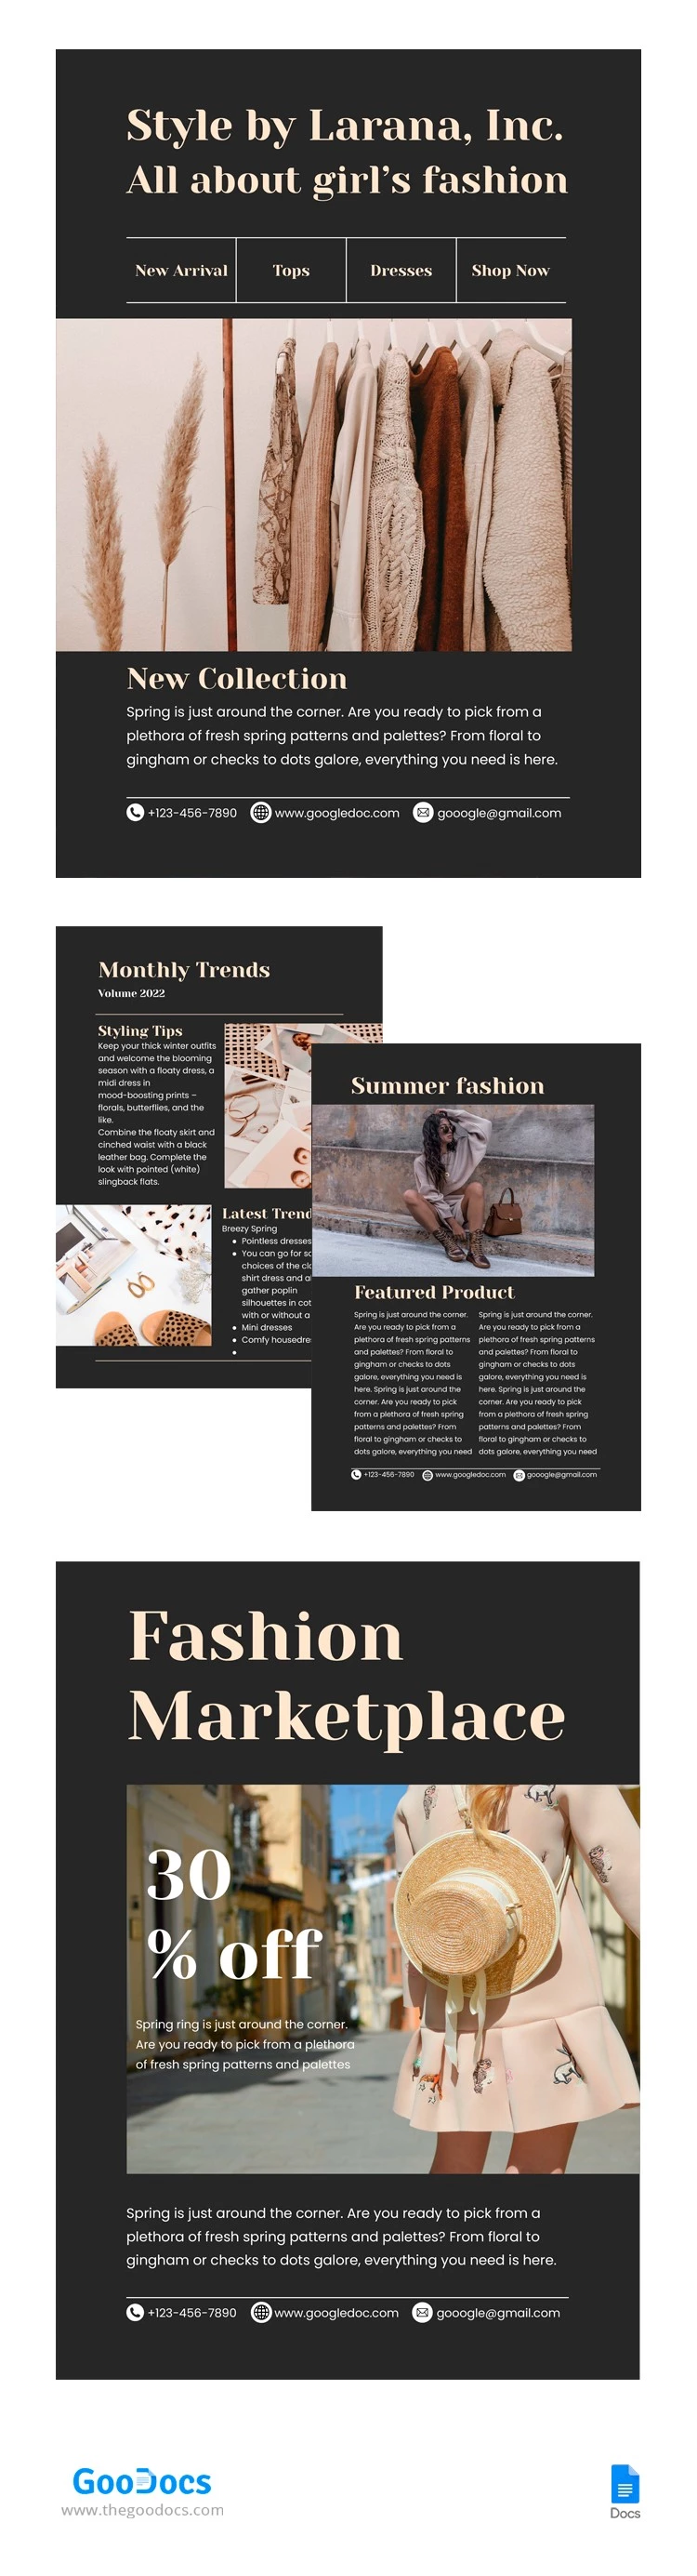 Fashion Look Newsletter - free Google Docs Template - 10064067